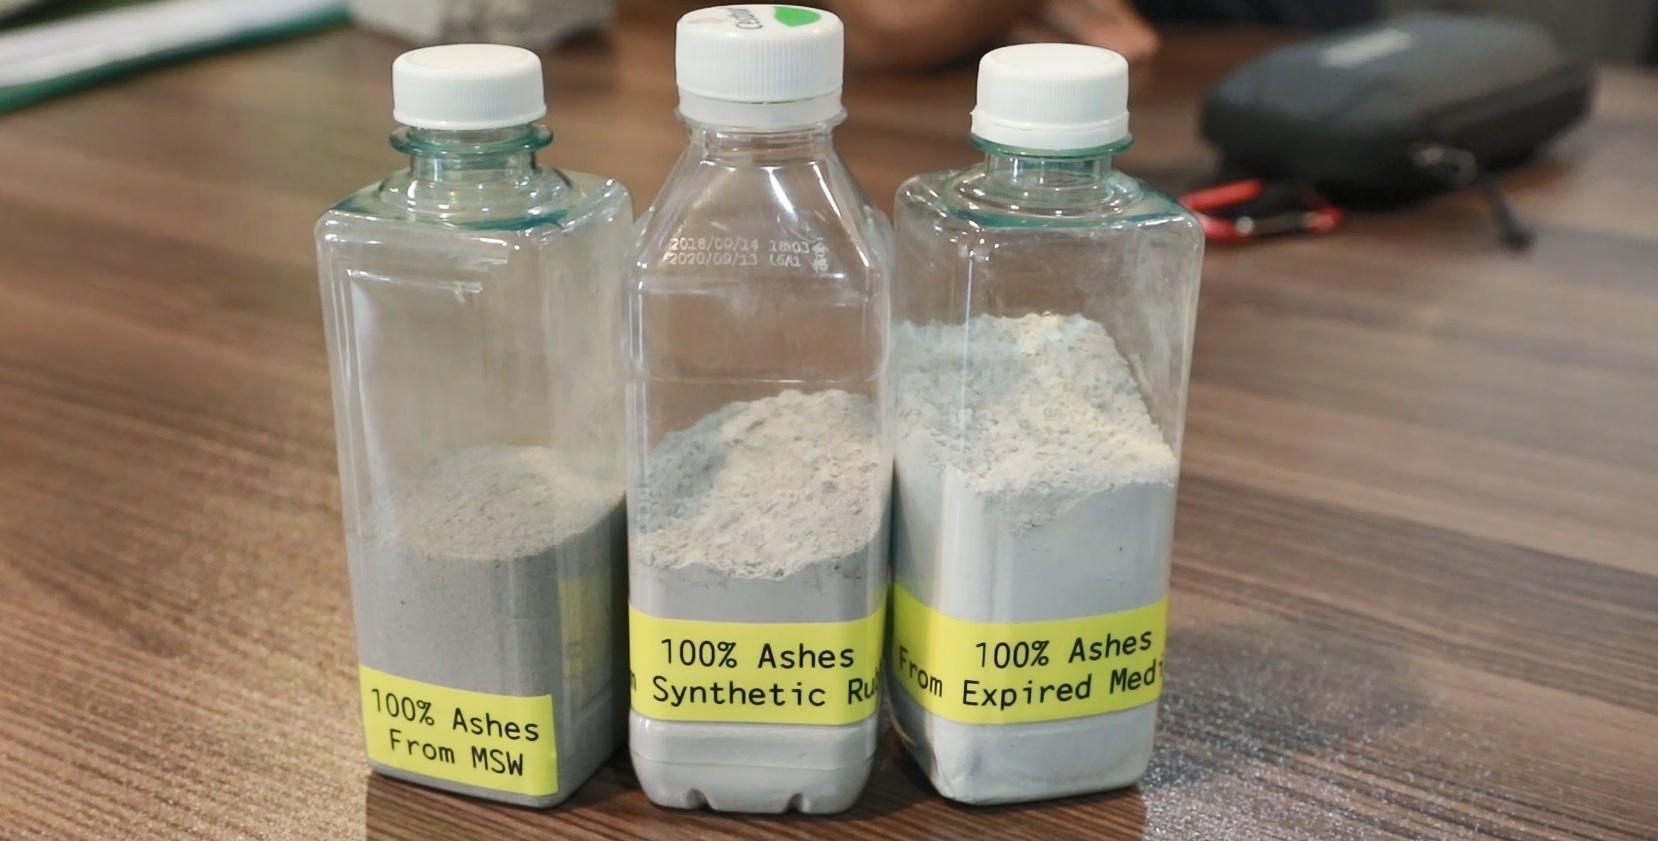 Different types of ash, from left to right: municipal solid waste, synthetic rubber waste and expired medicine.